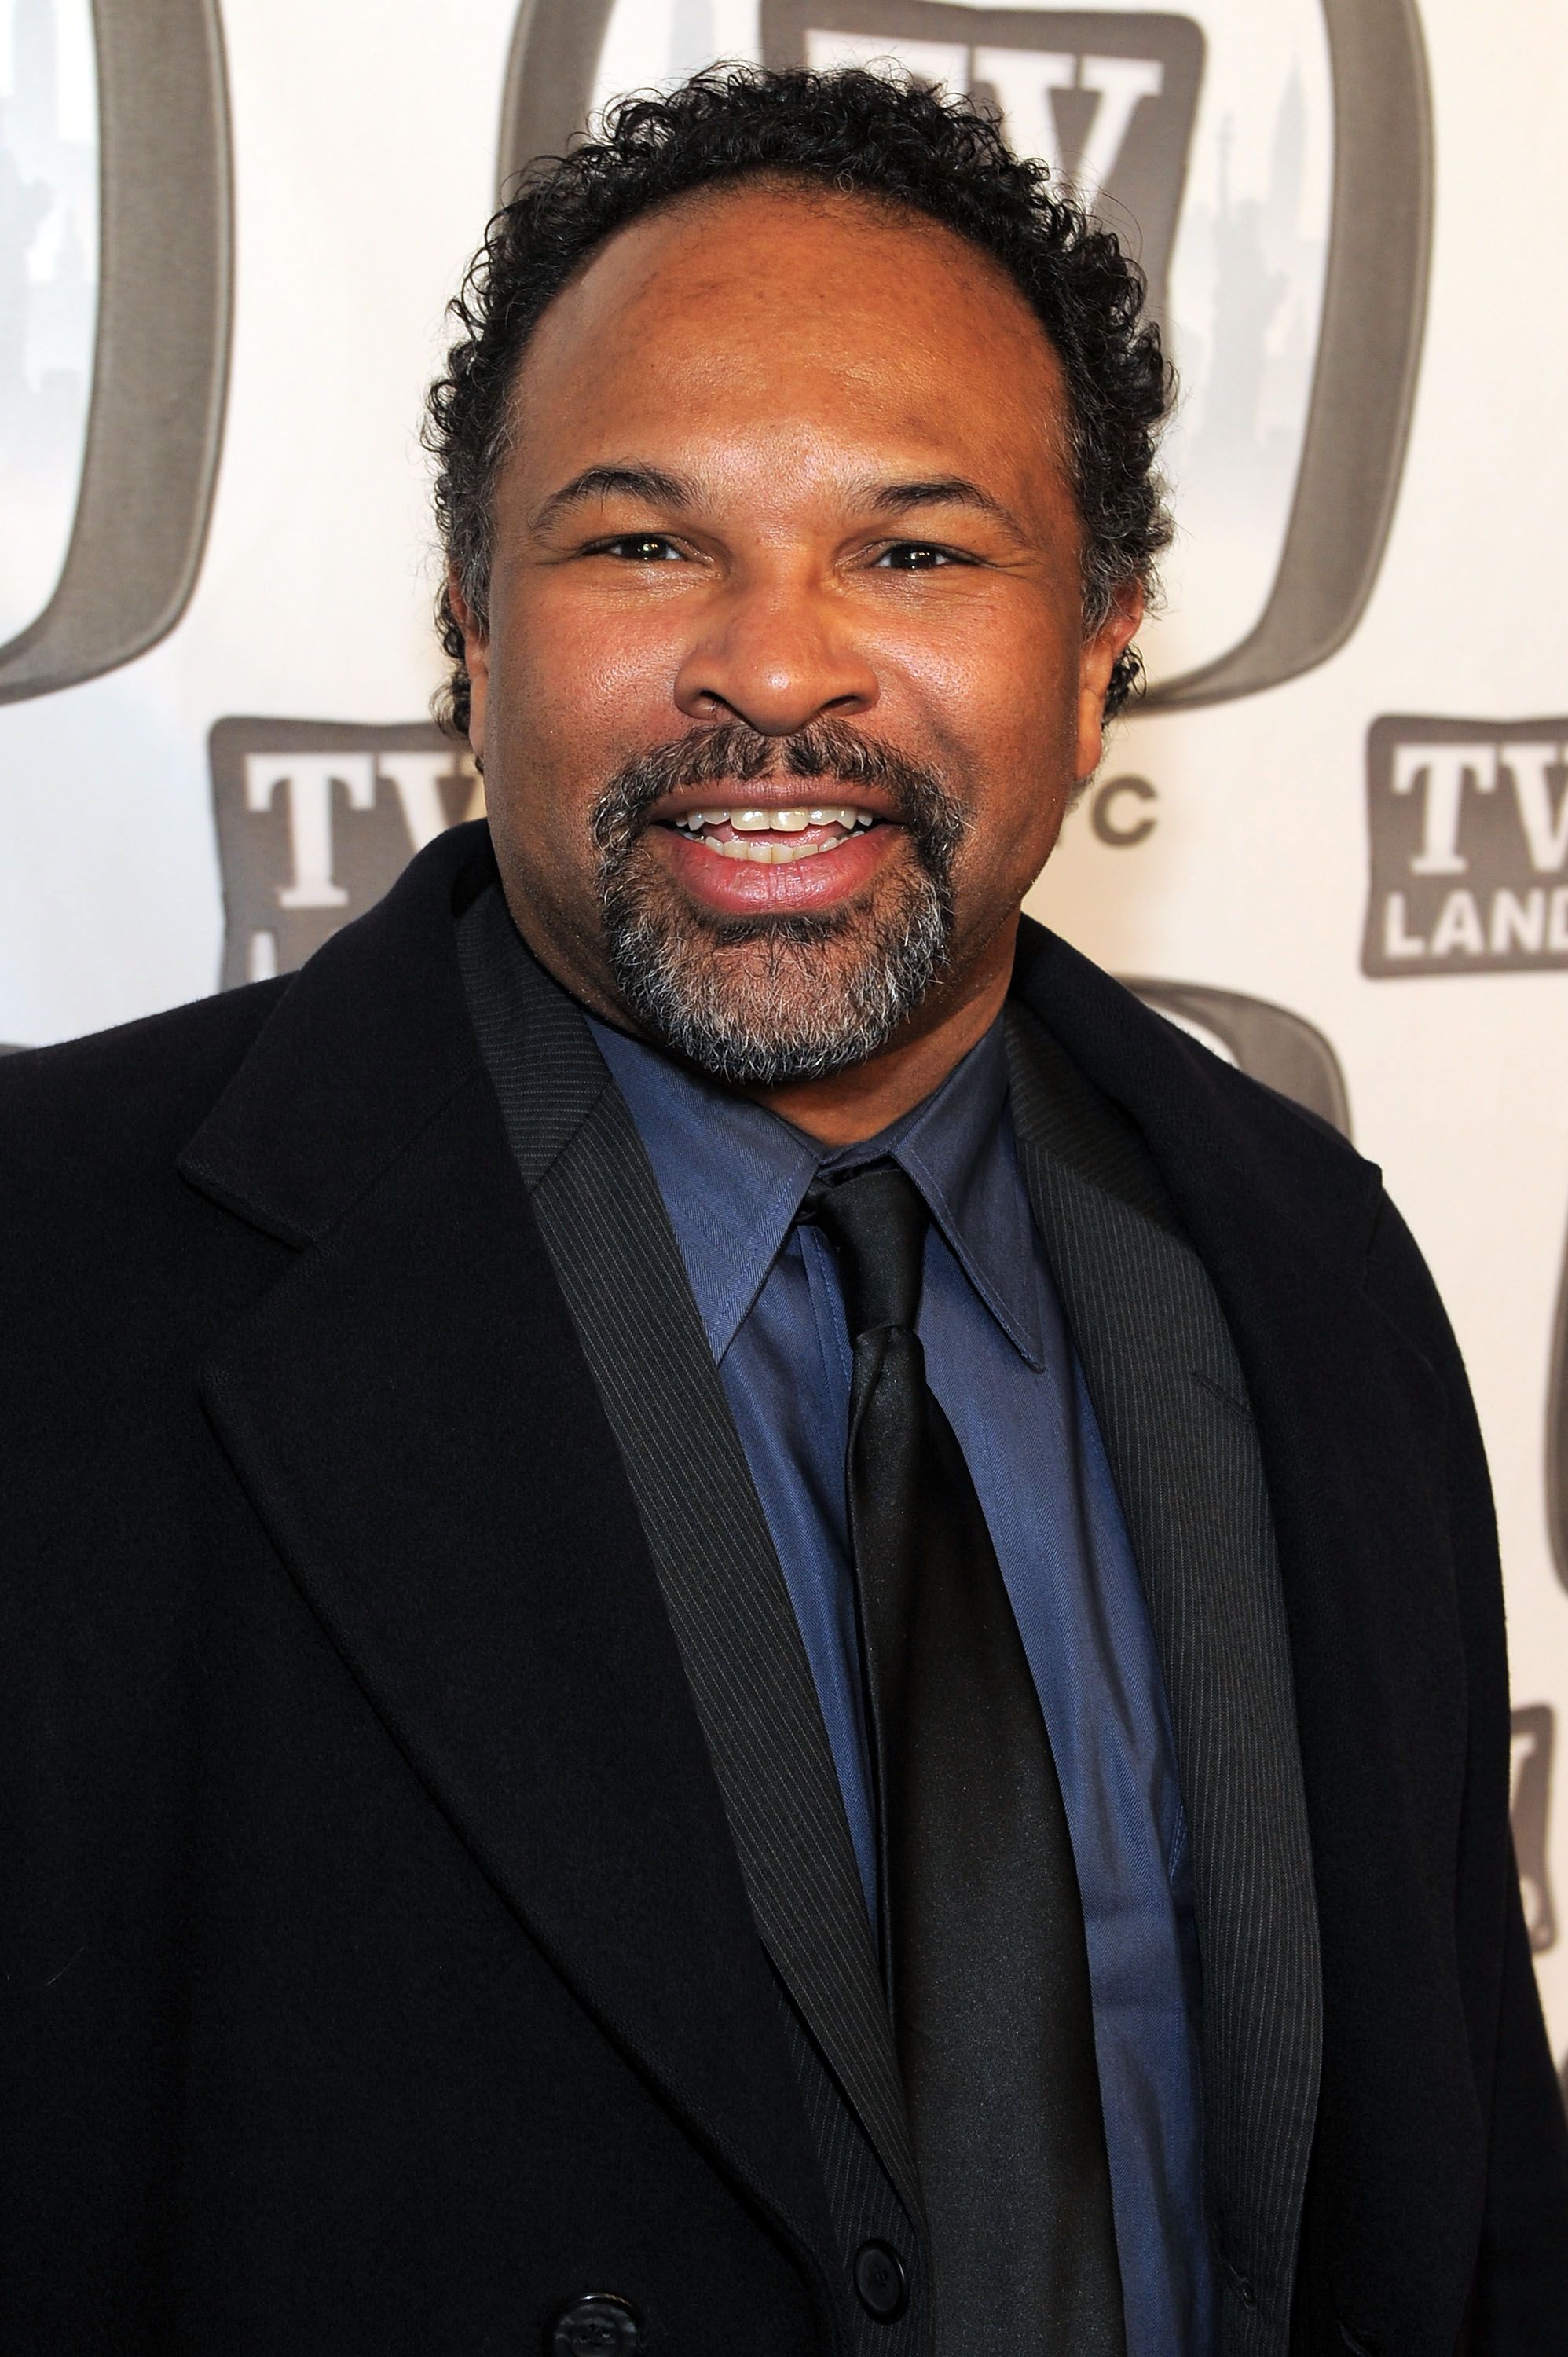 Geoffrey Owens during the 9th Annual TV Land Awards at the Javits Center on April 10, 2011 in New York City. | Source: Getty Images